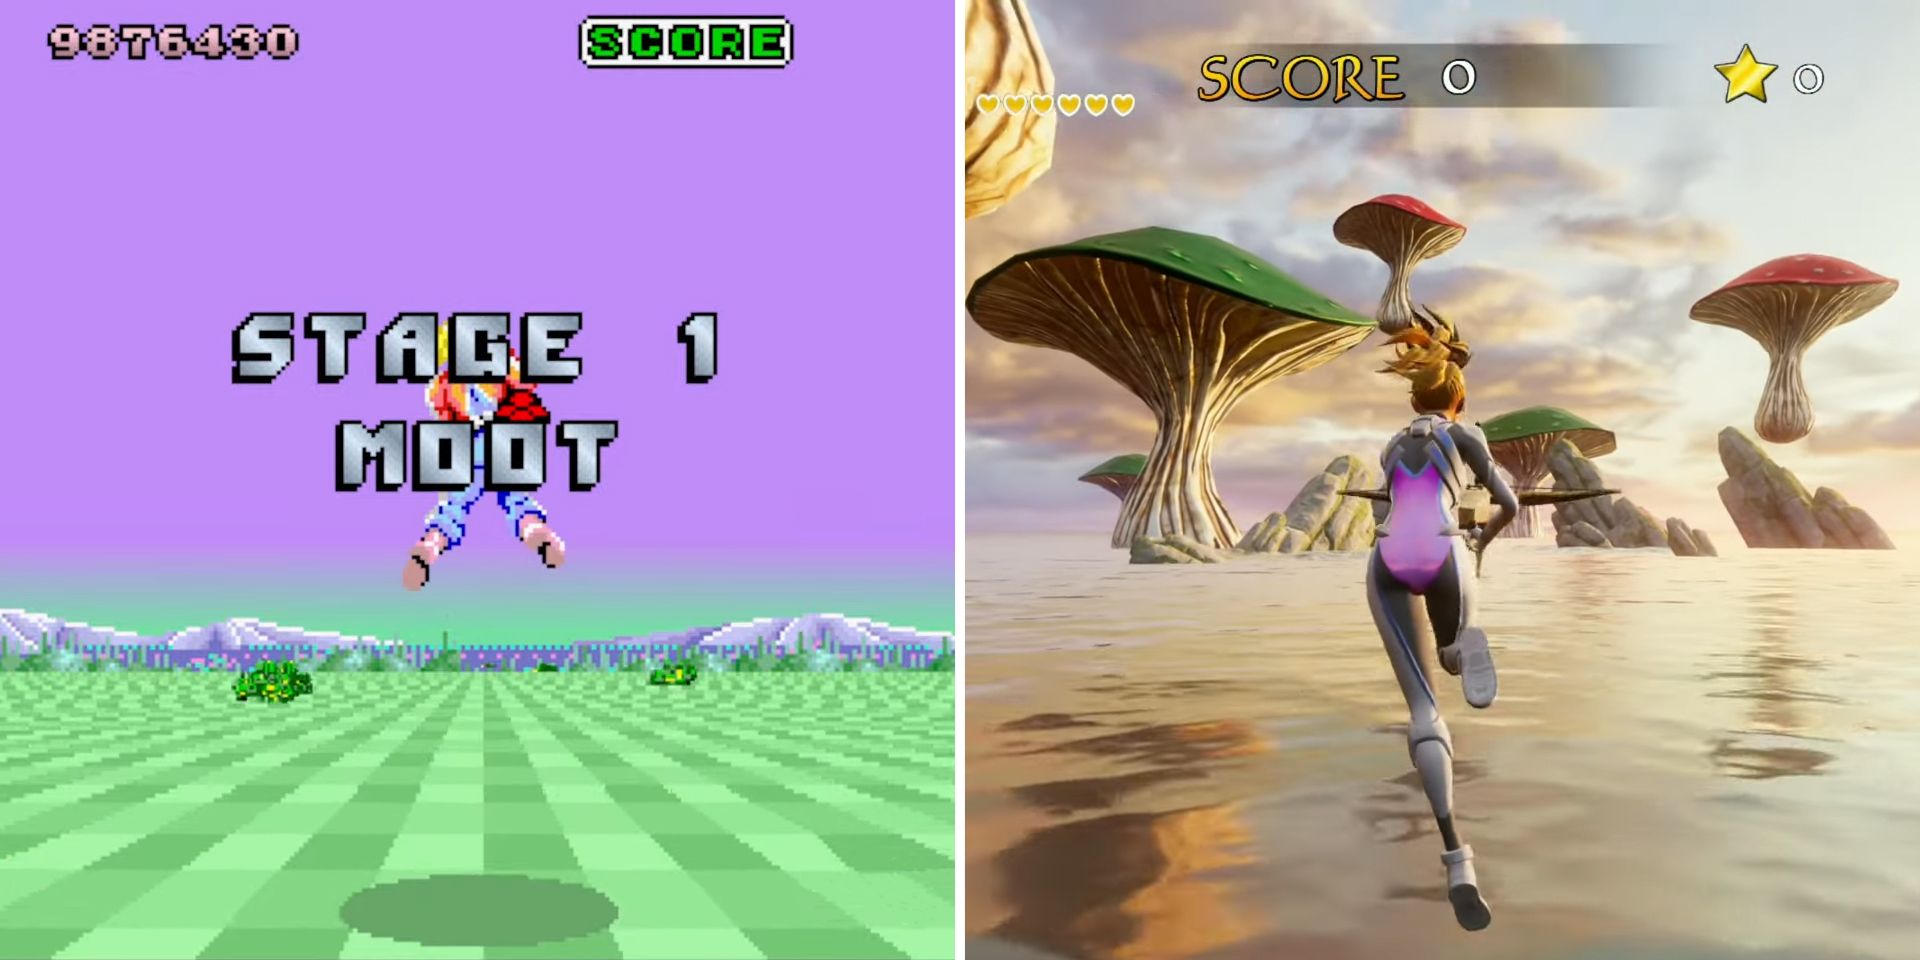 Space Harrier (1985) and Air Twister (2022)